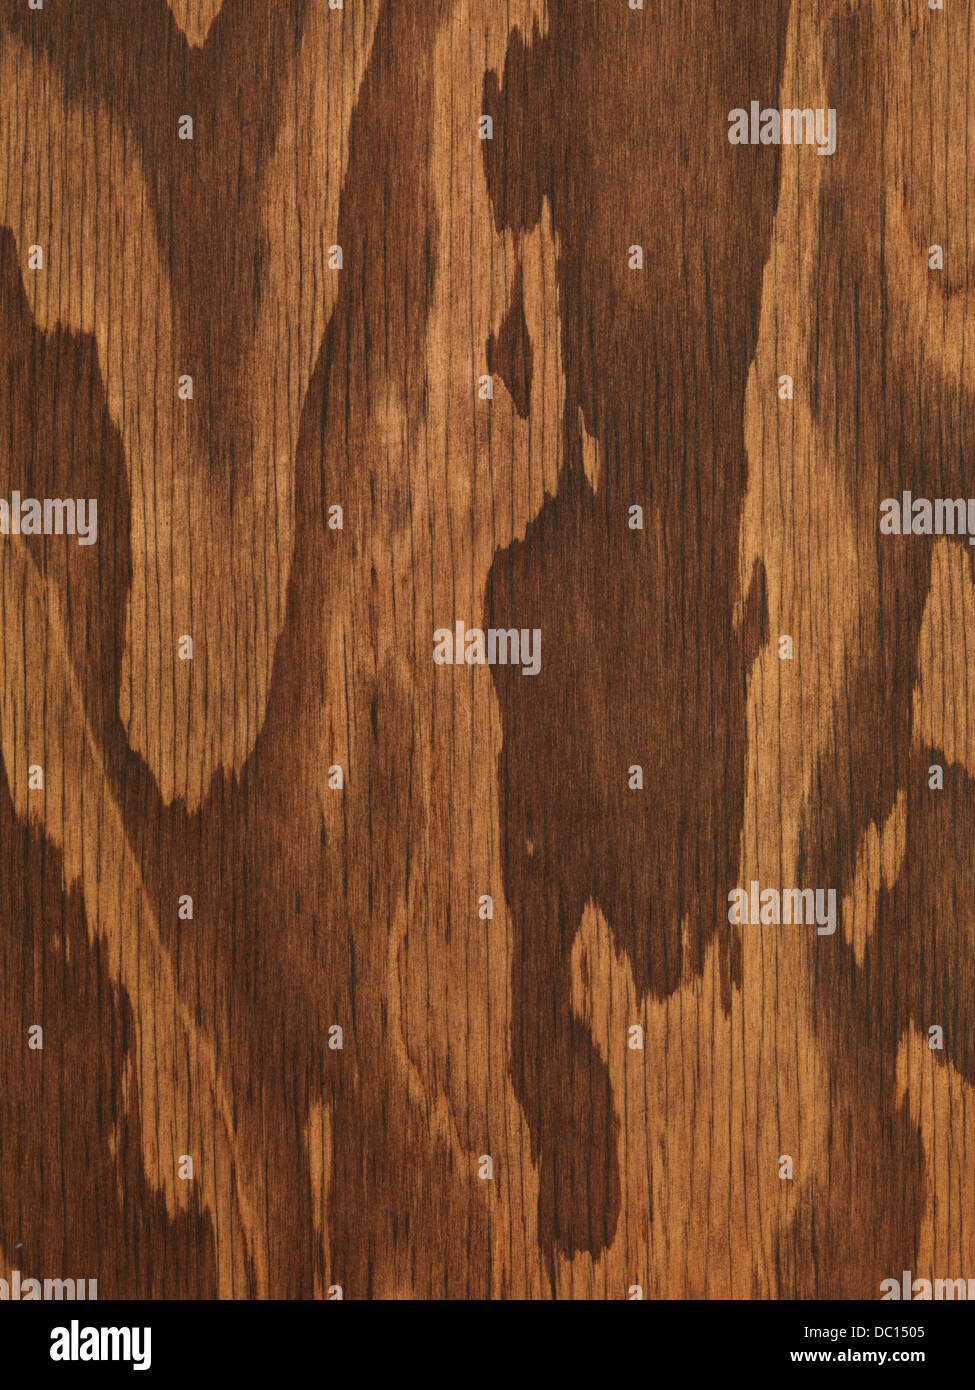 Brown plywood abstract wood texture background Stock Photo